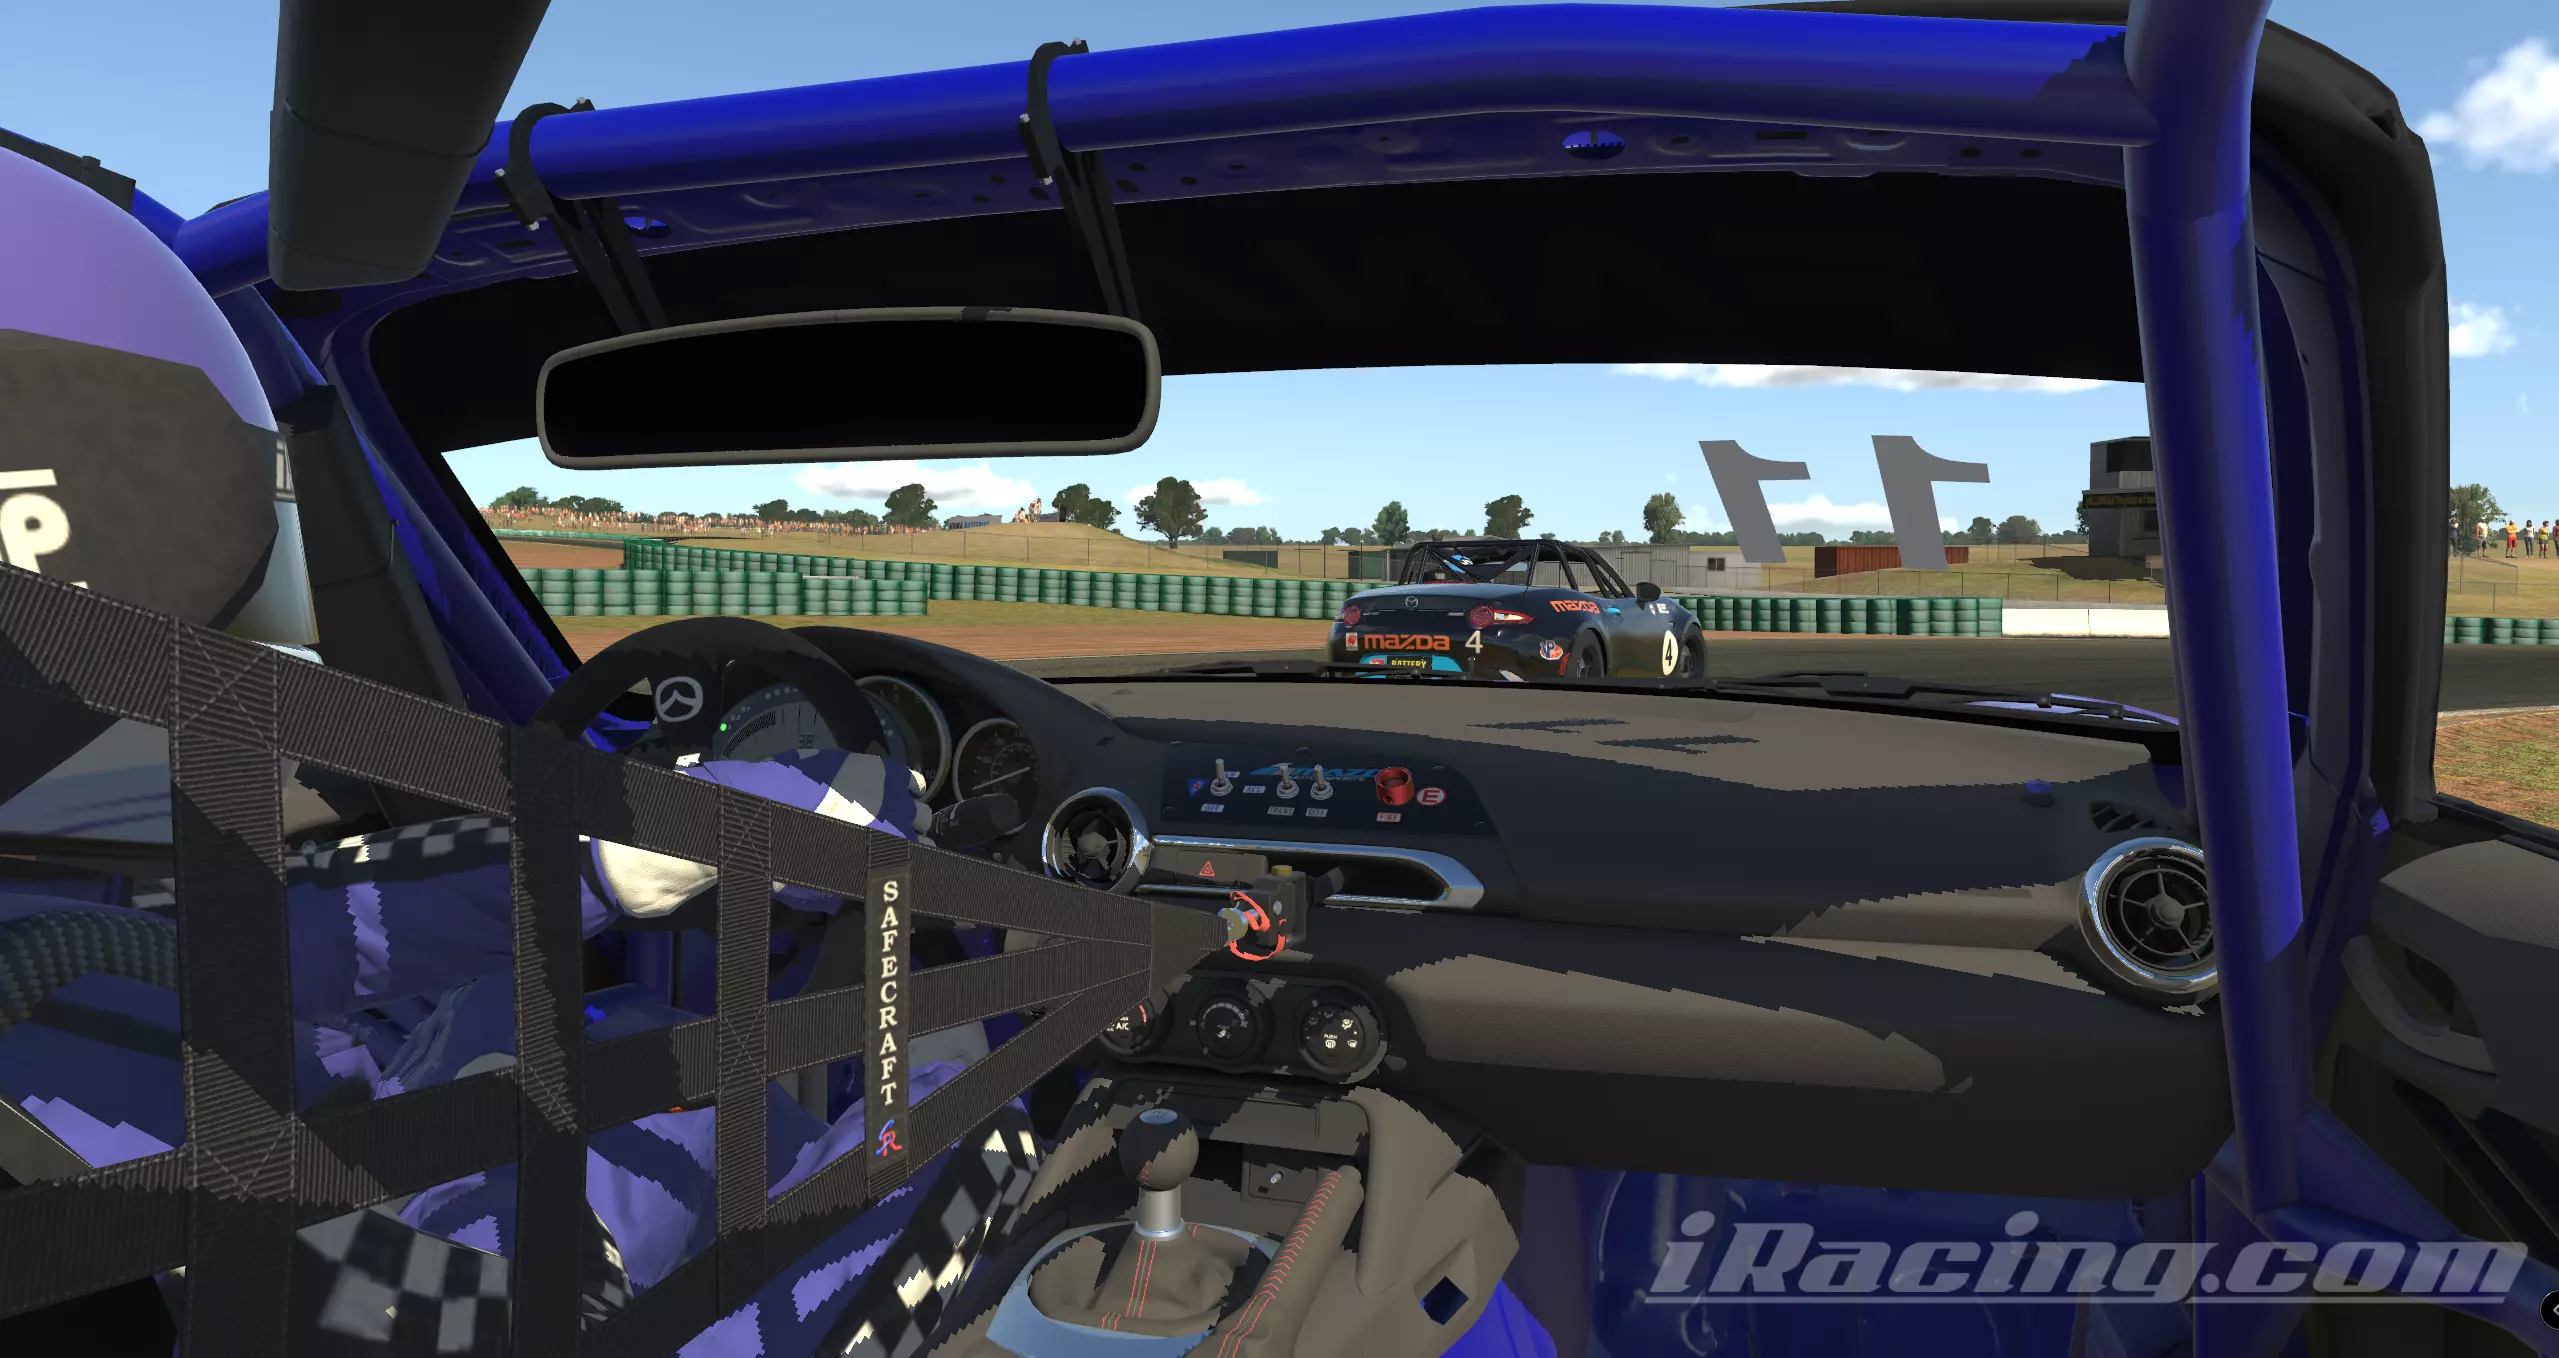 iRacing Is Only Fun if You’re Willing To Invest Real Time and Money in Gaming